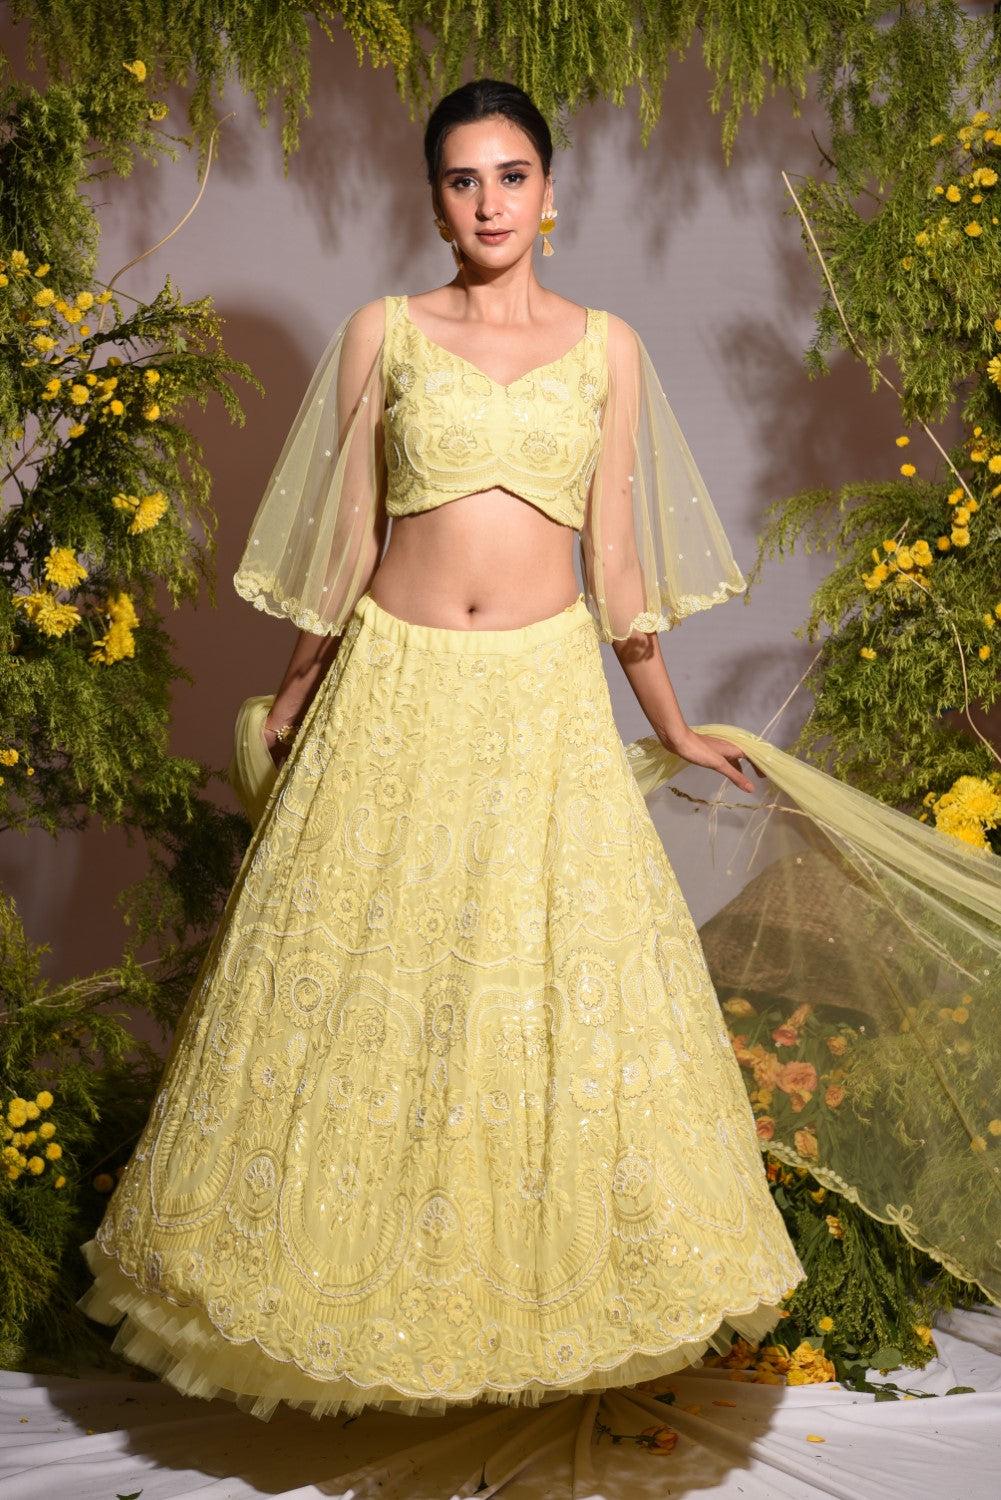 Lemon Yellow Georgette Lehenga In Stripe Design And A Floral Patch On The  Top - Small Wonder Dresses